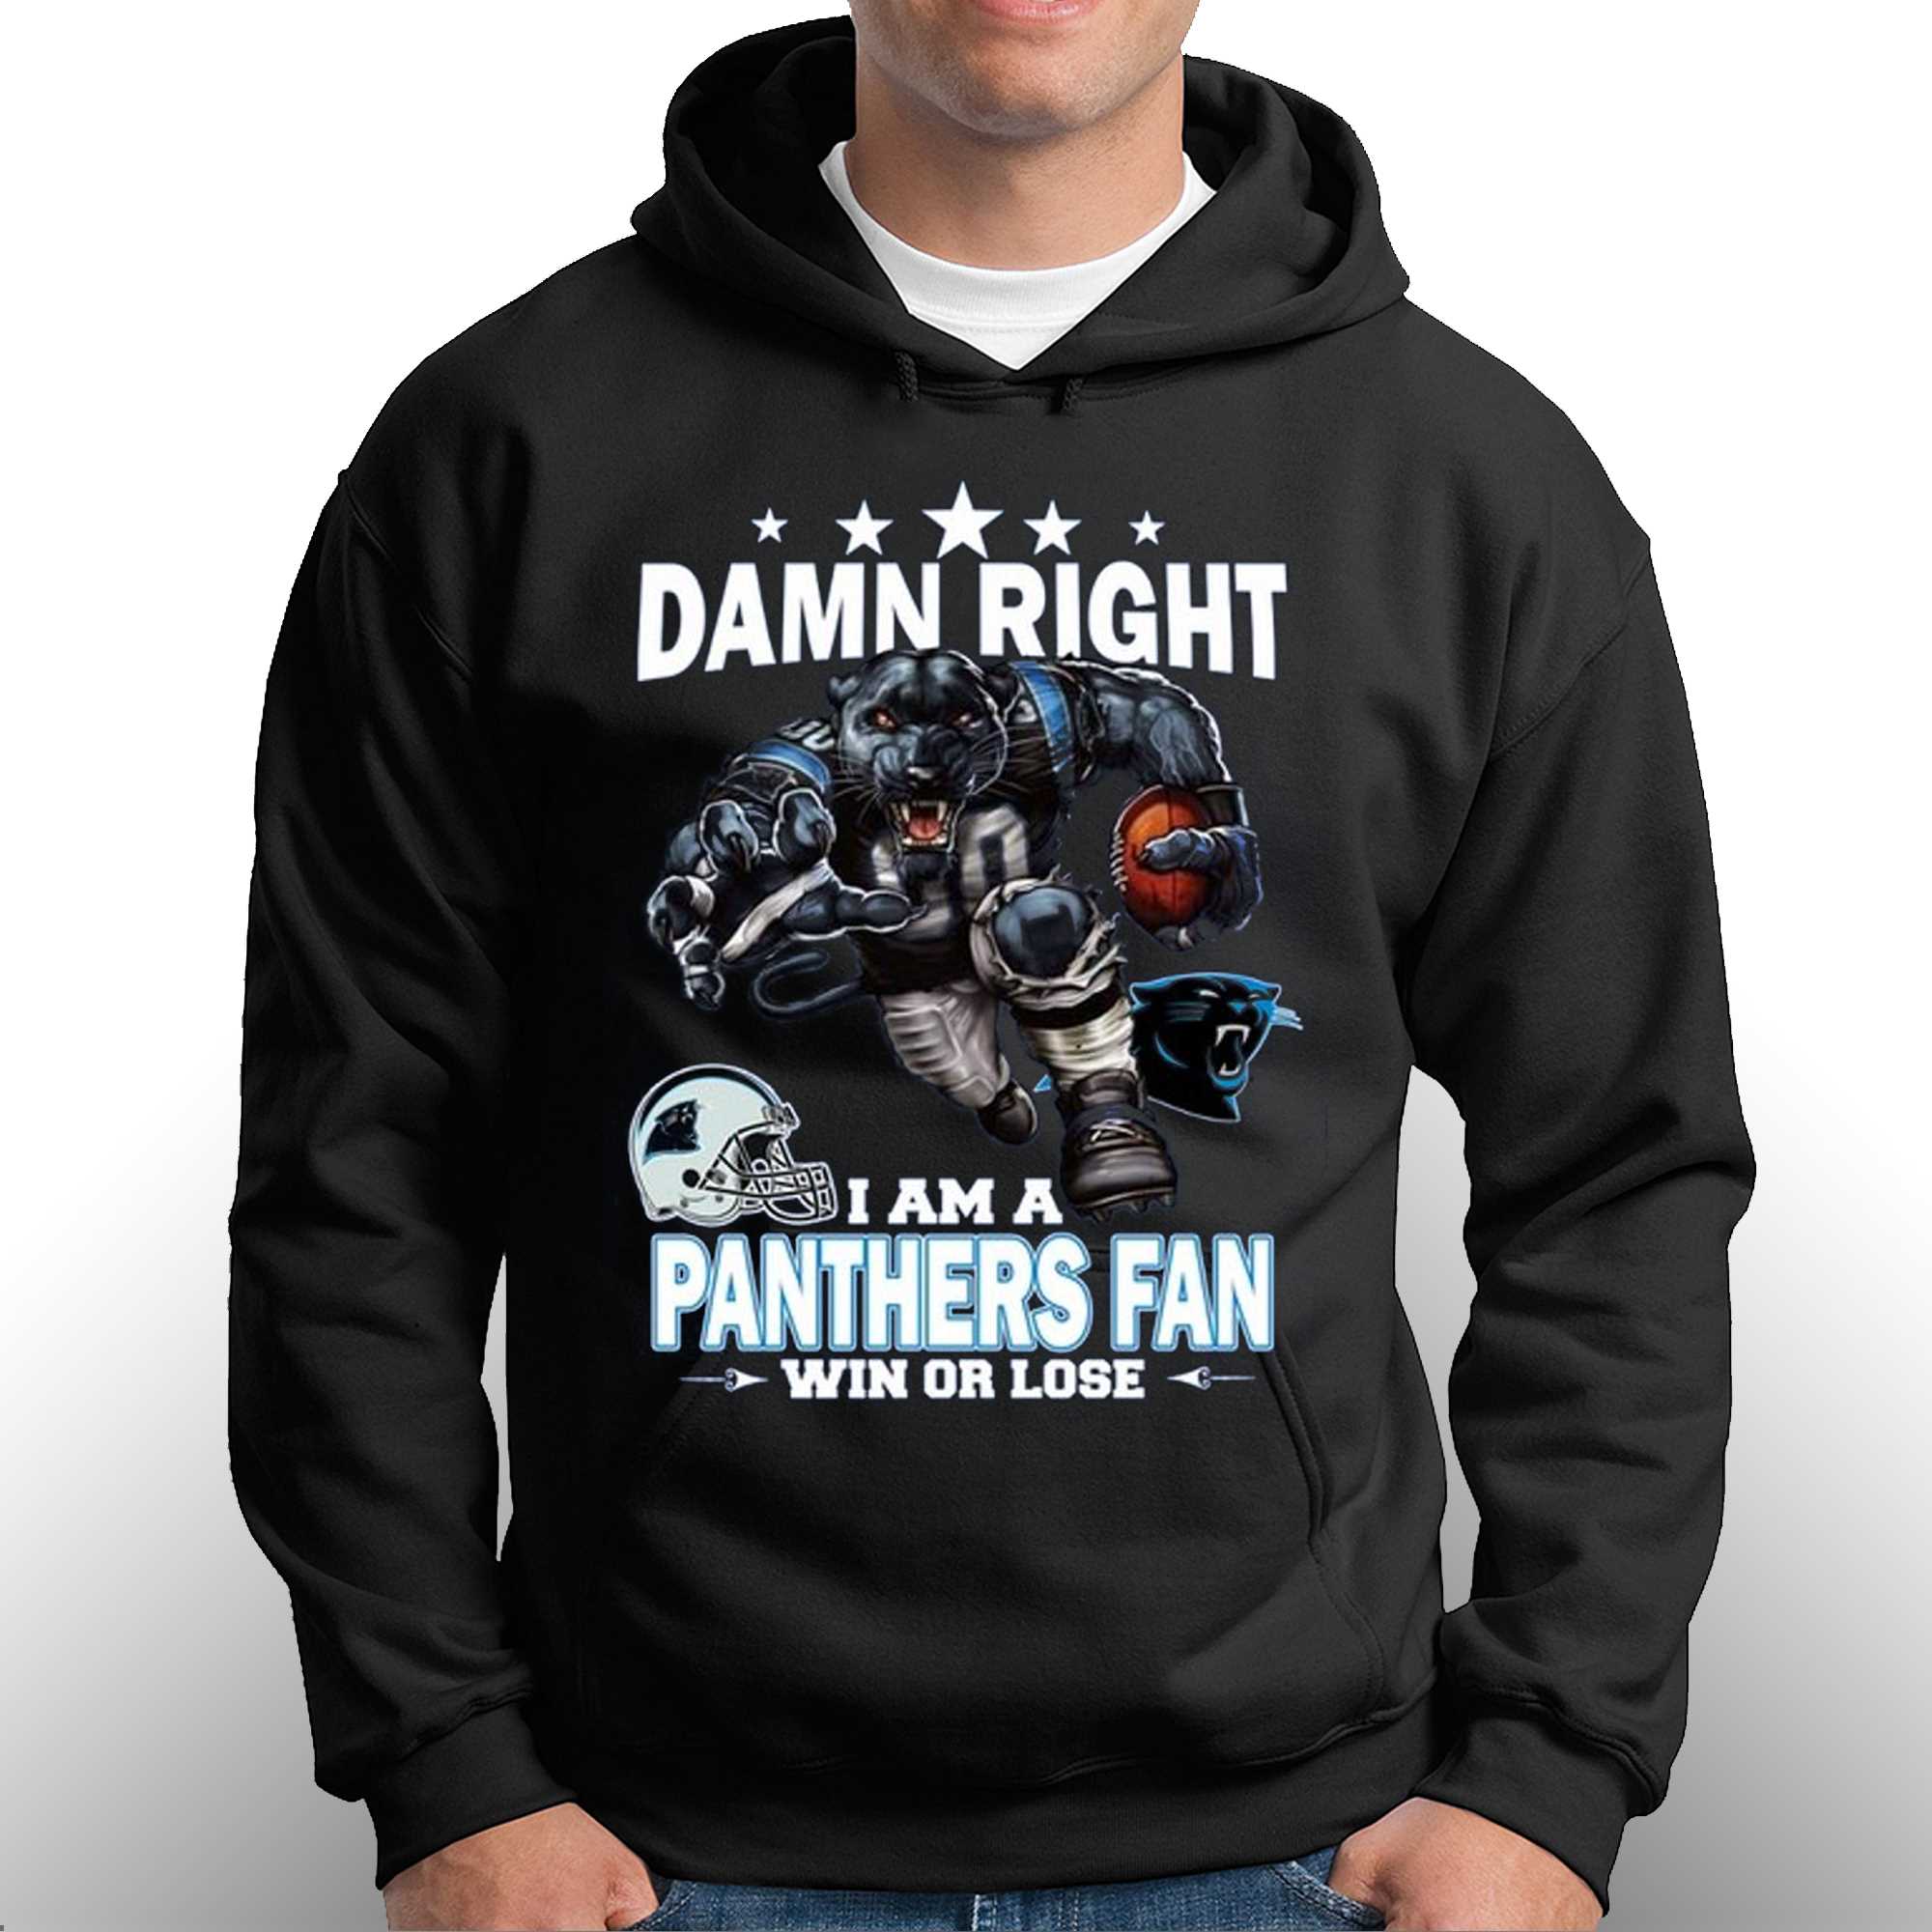 panthers gear near me